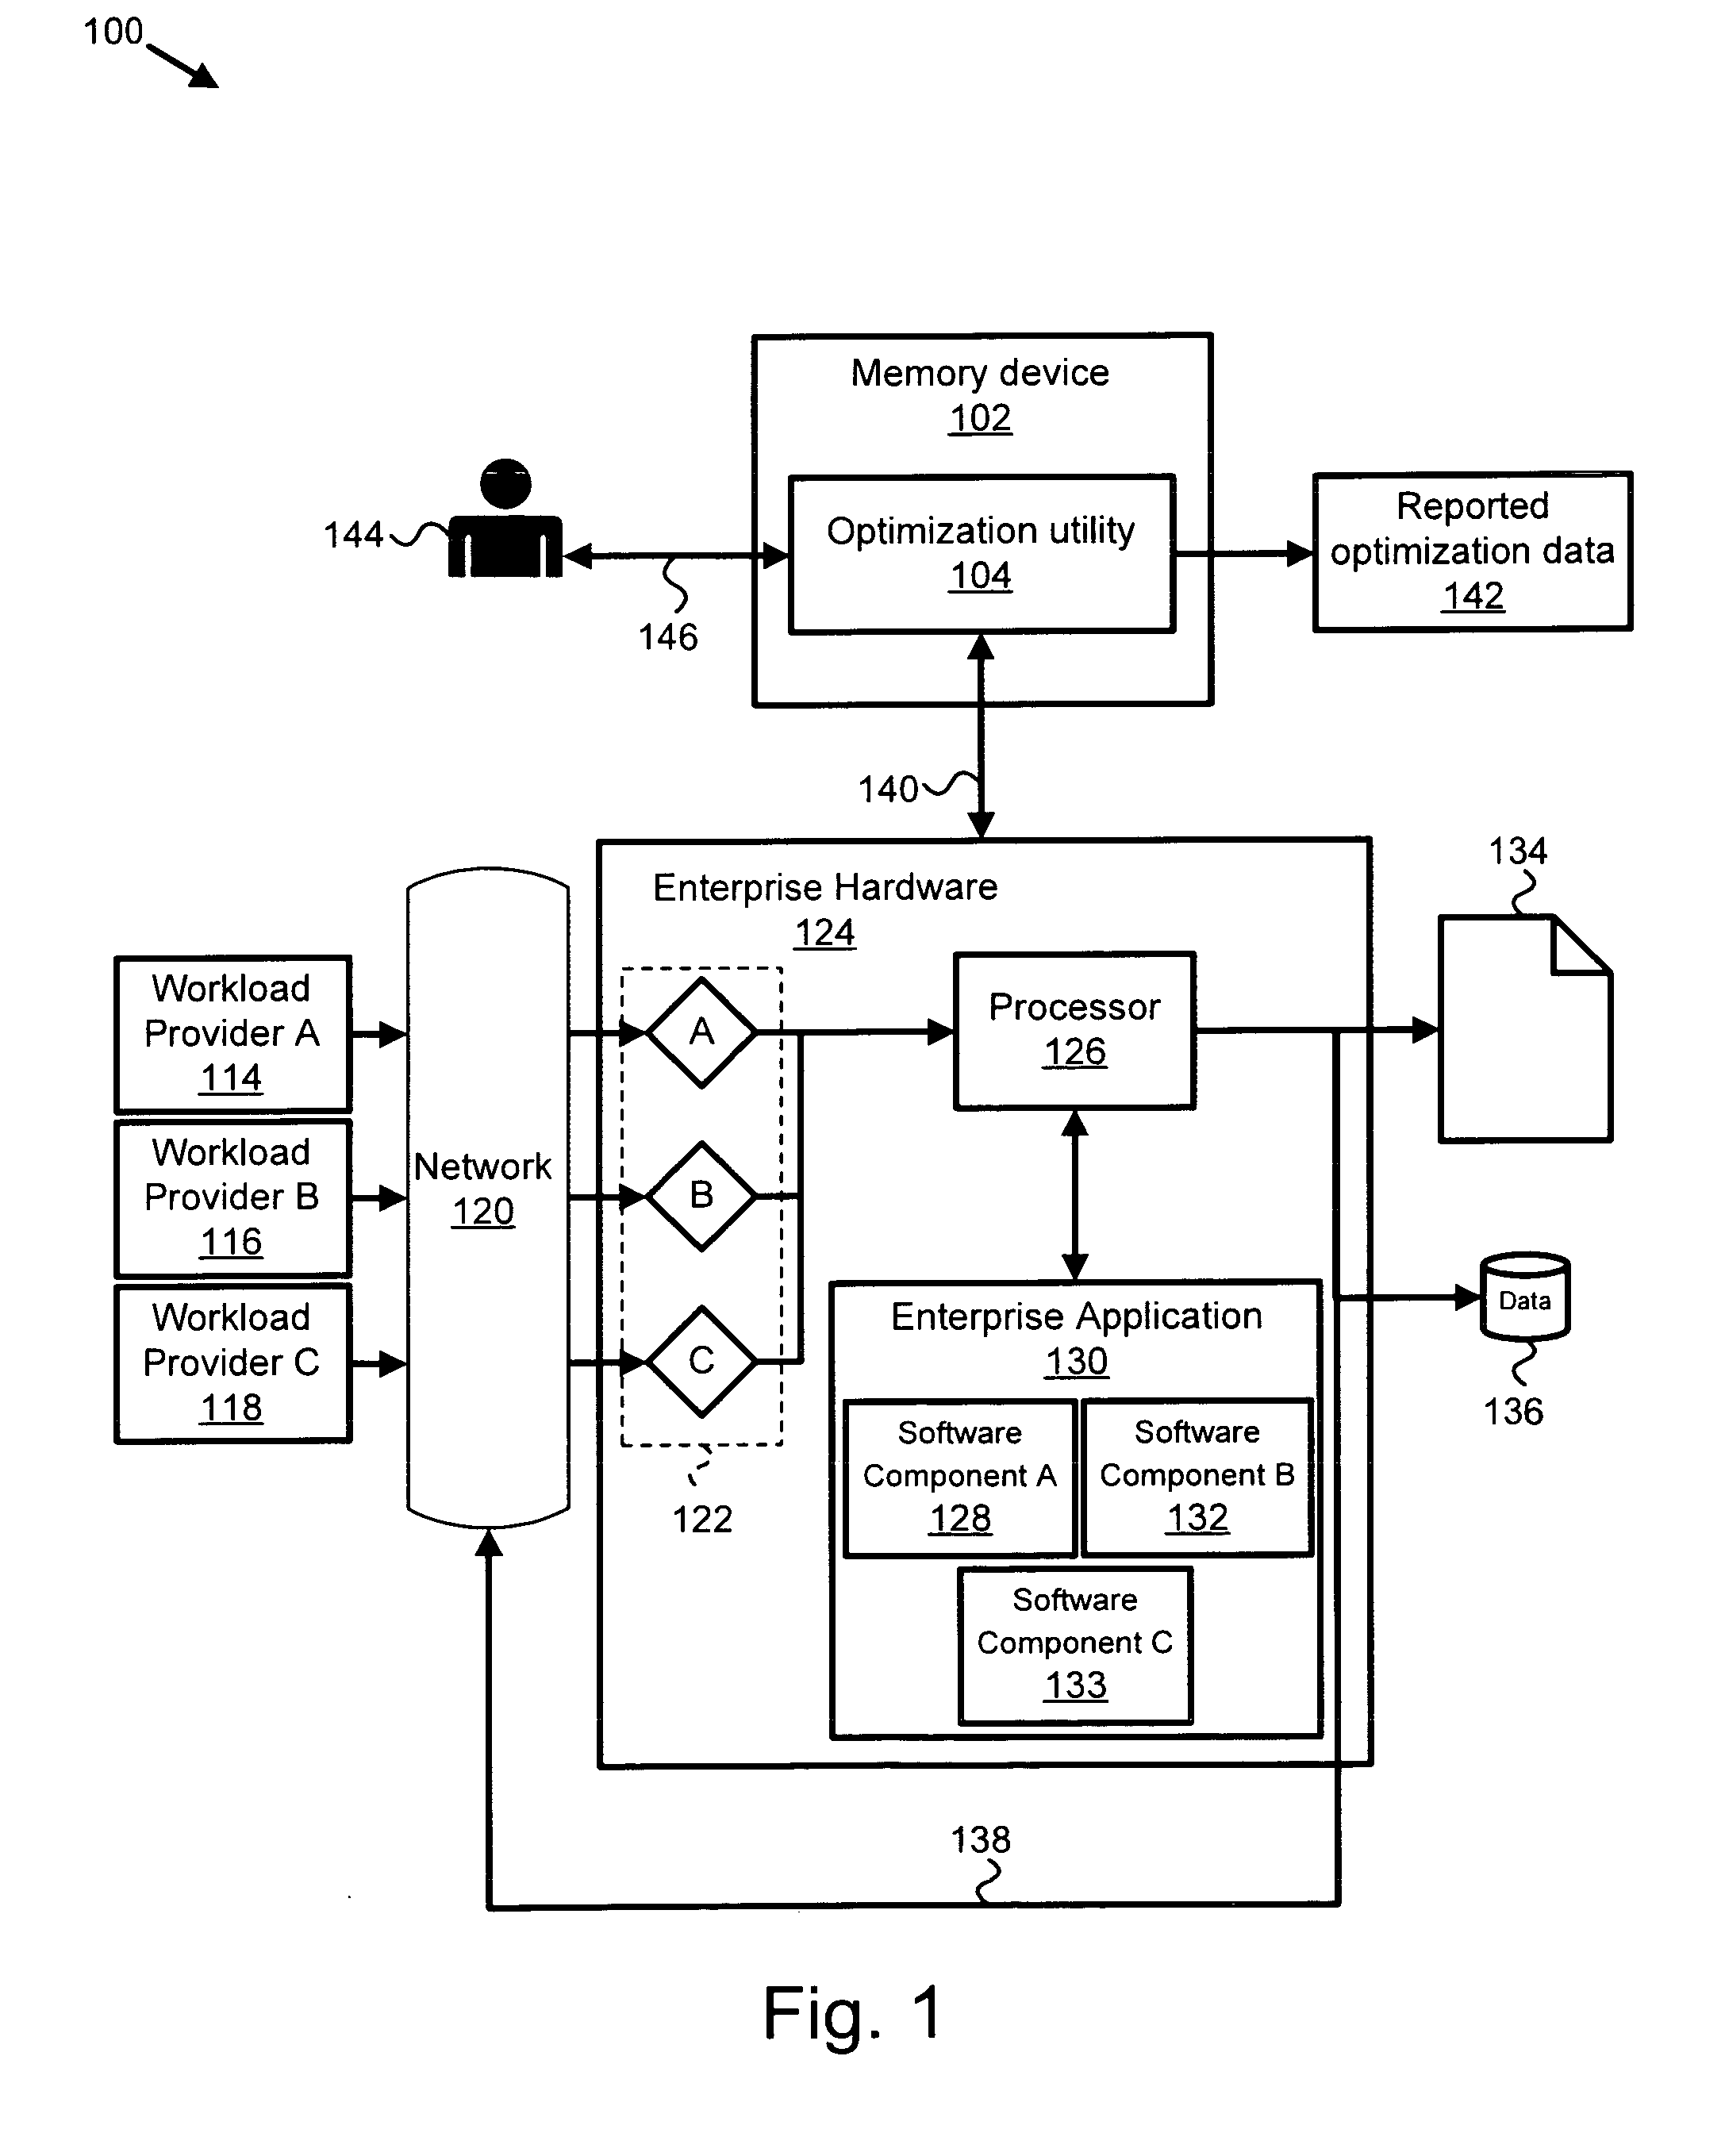 Apparatus, system, and method for modeling, projecting, and optimizing an enterprise application system